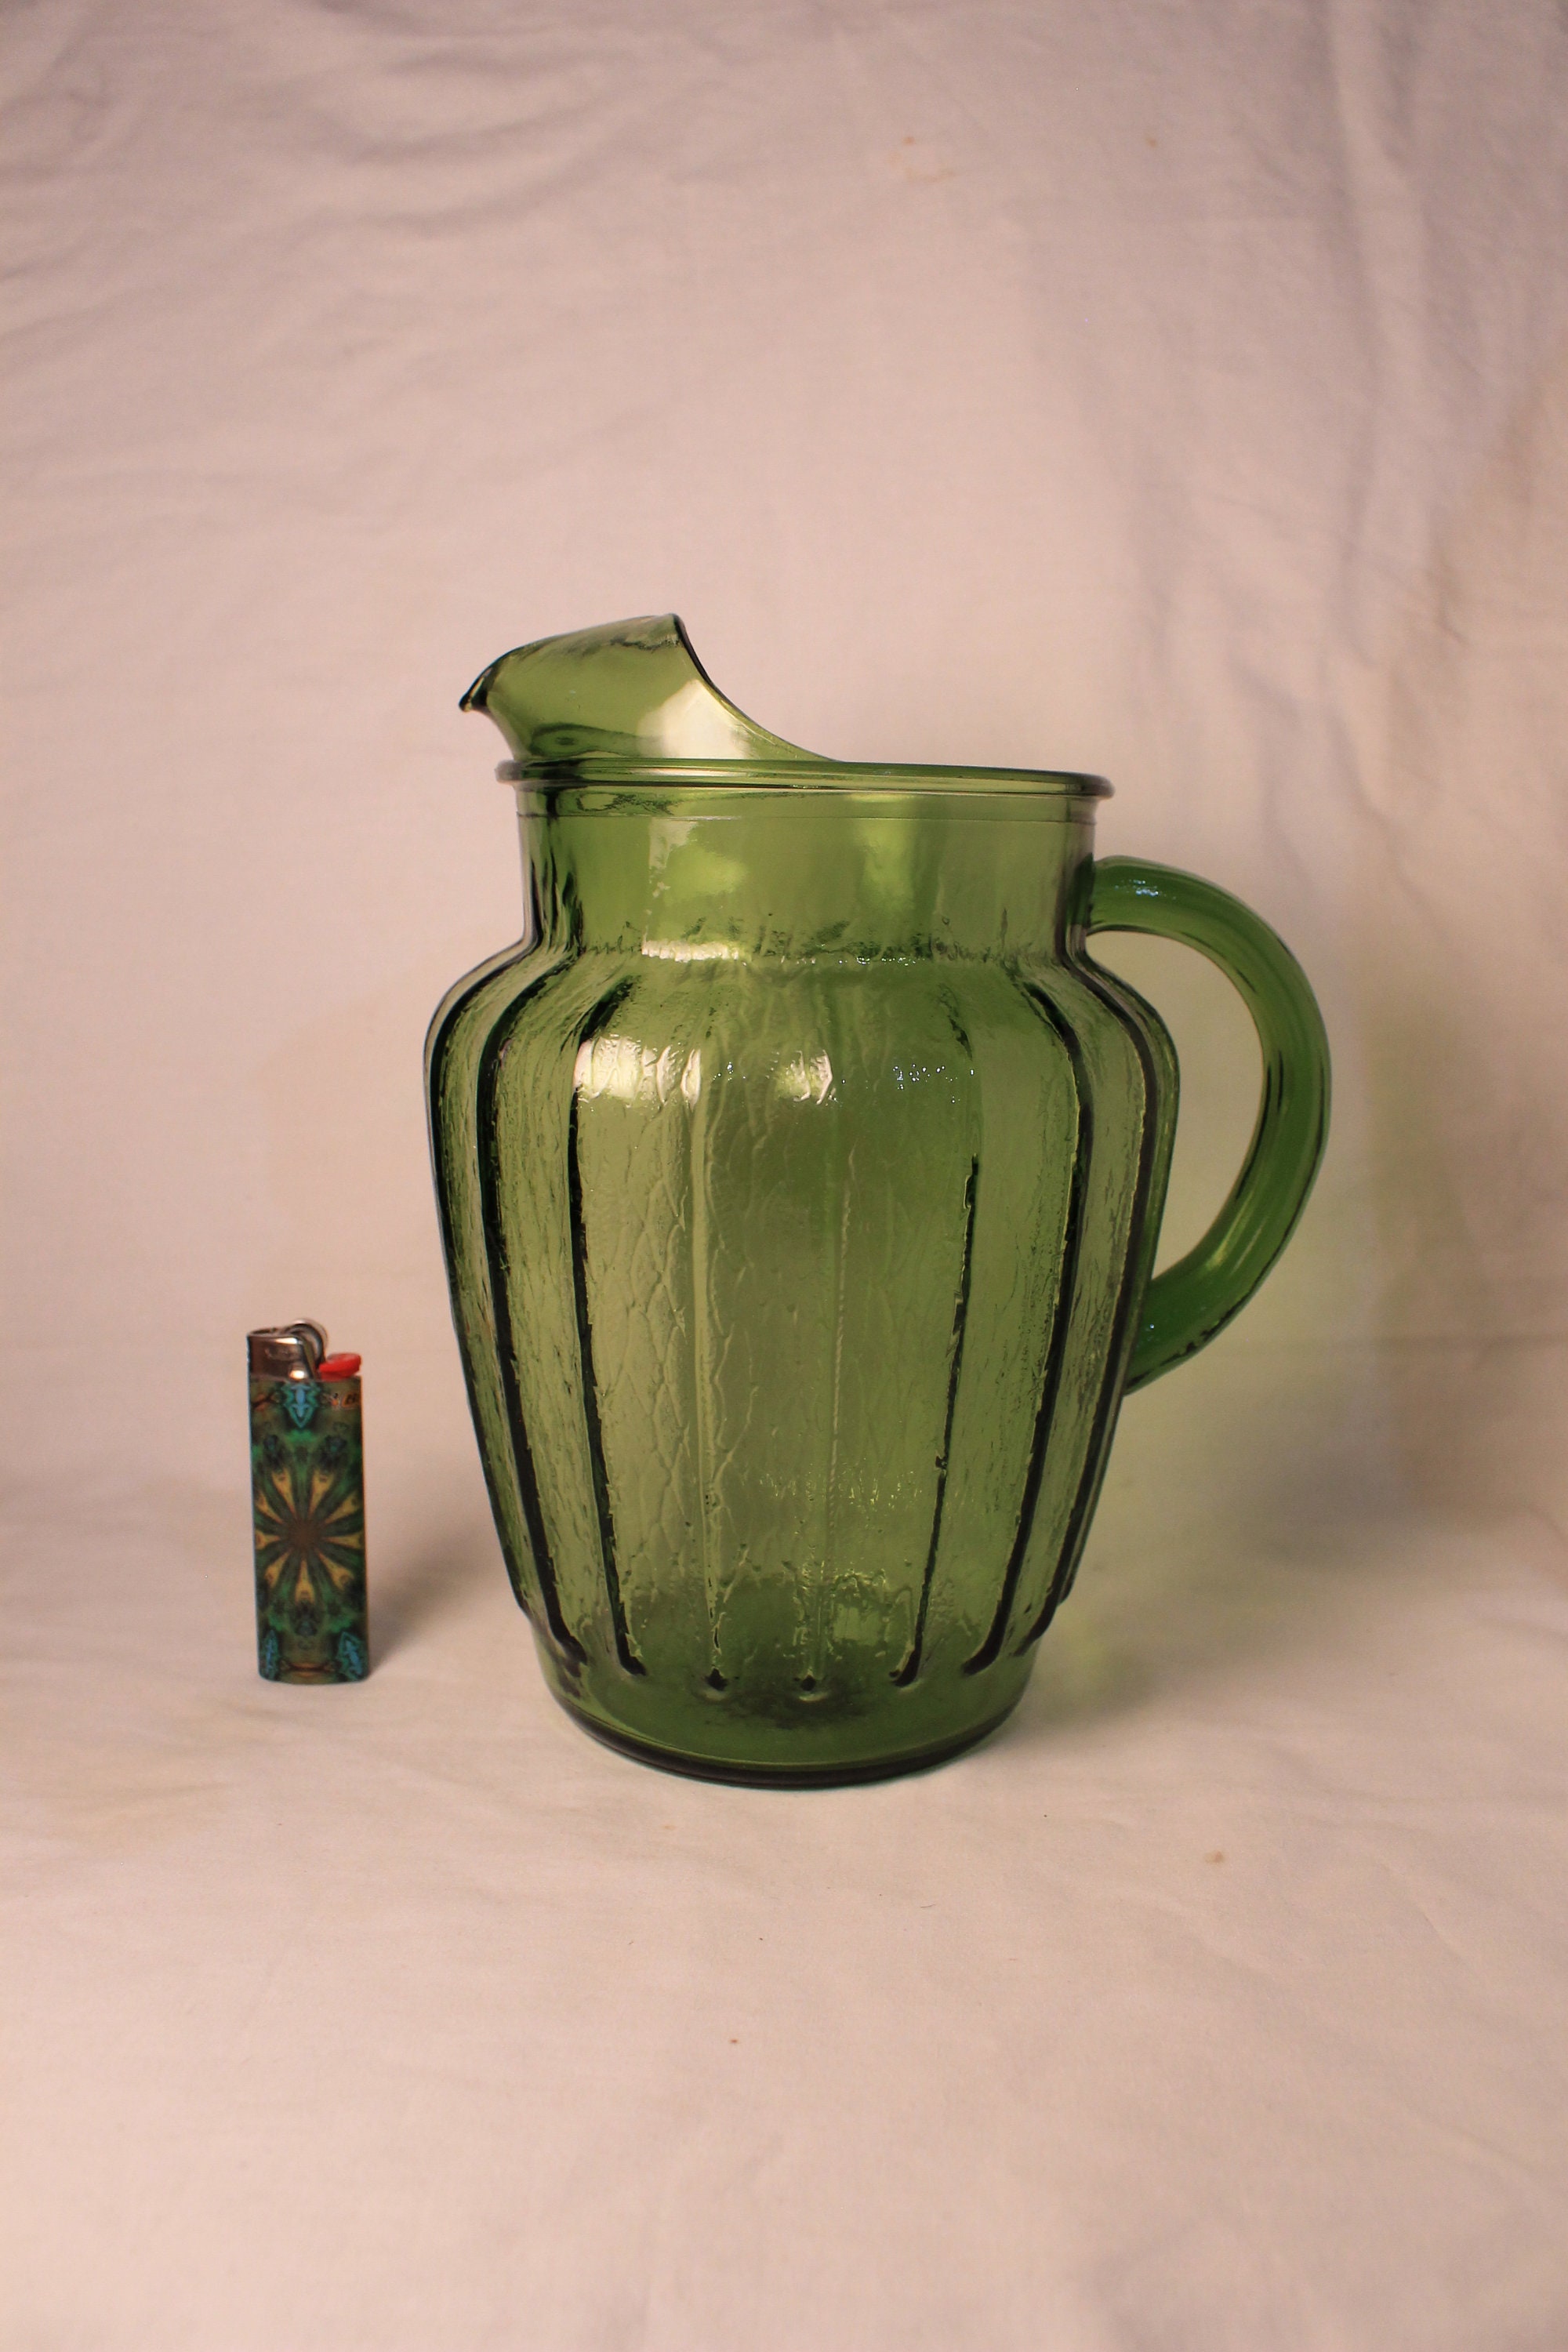 Green Vintage Pitcher, 70s Plastic Pitcher, Tea or Water Pitcher